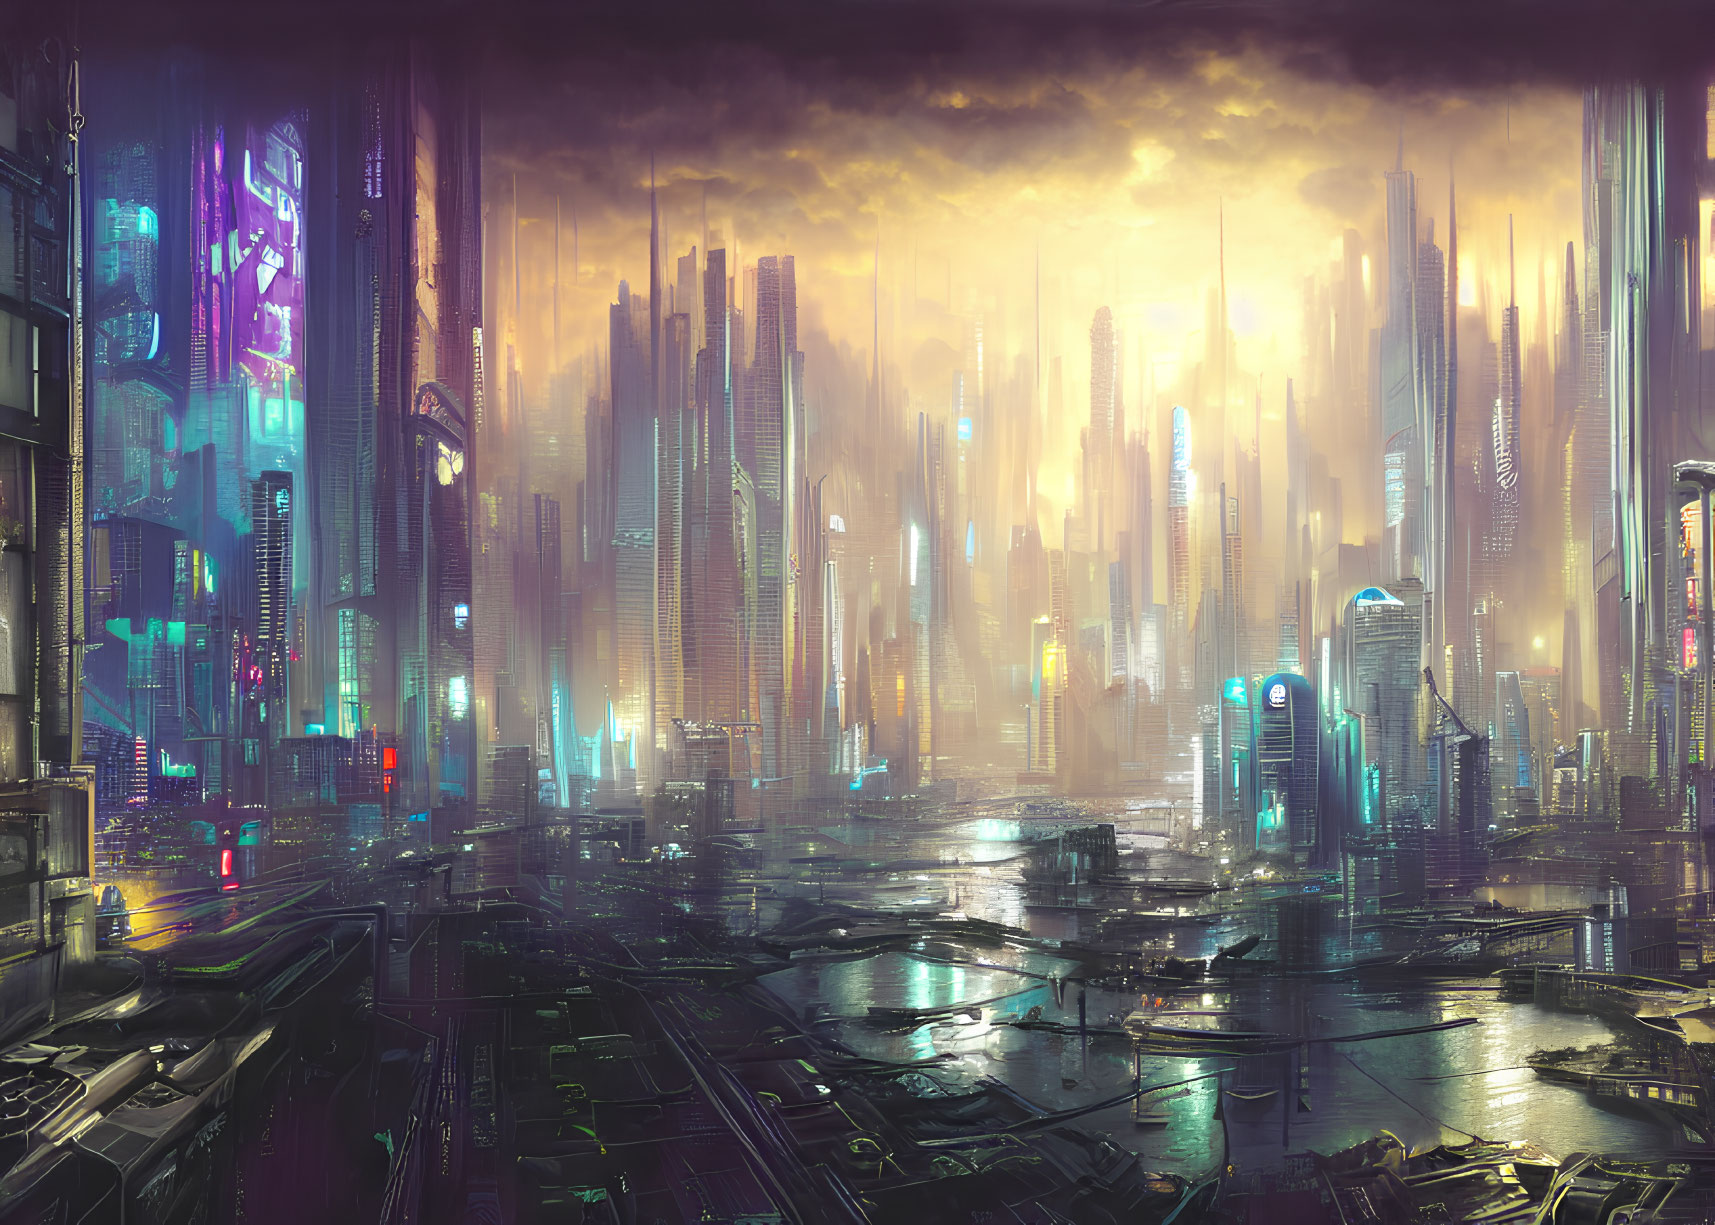 Futuristic cityscape with skyscrapers, neon signs, and golden sunset